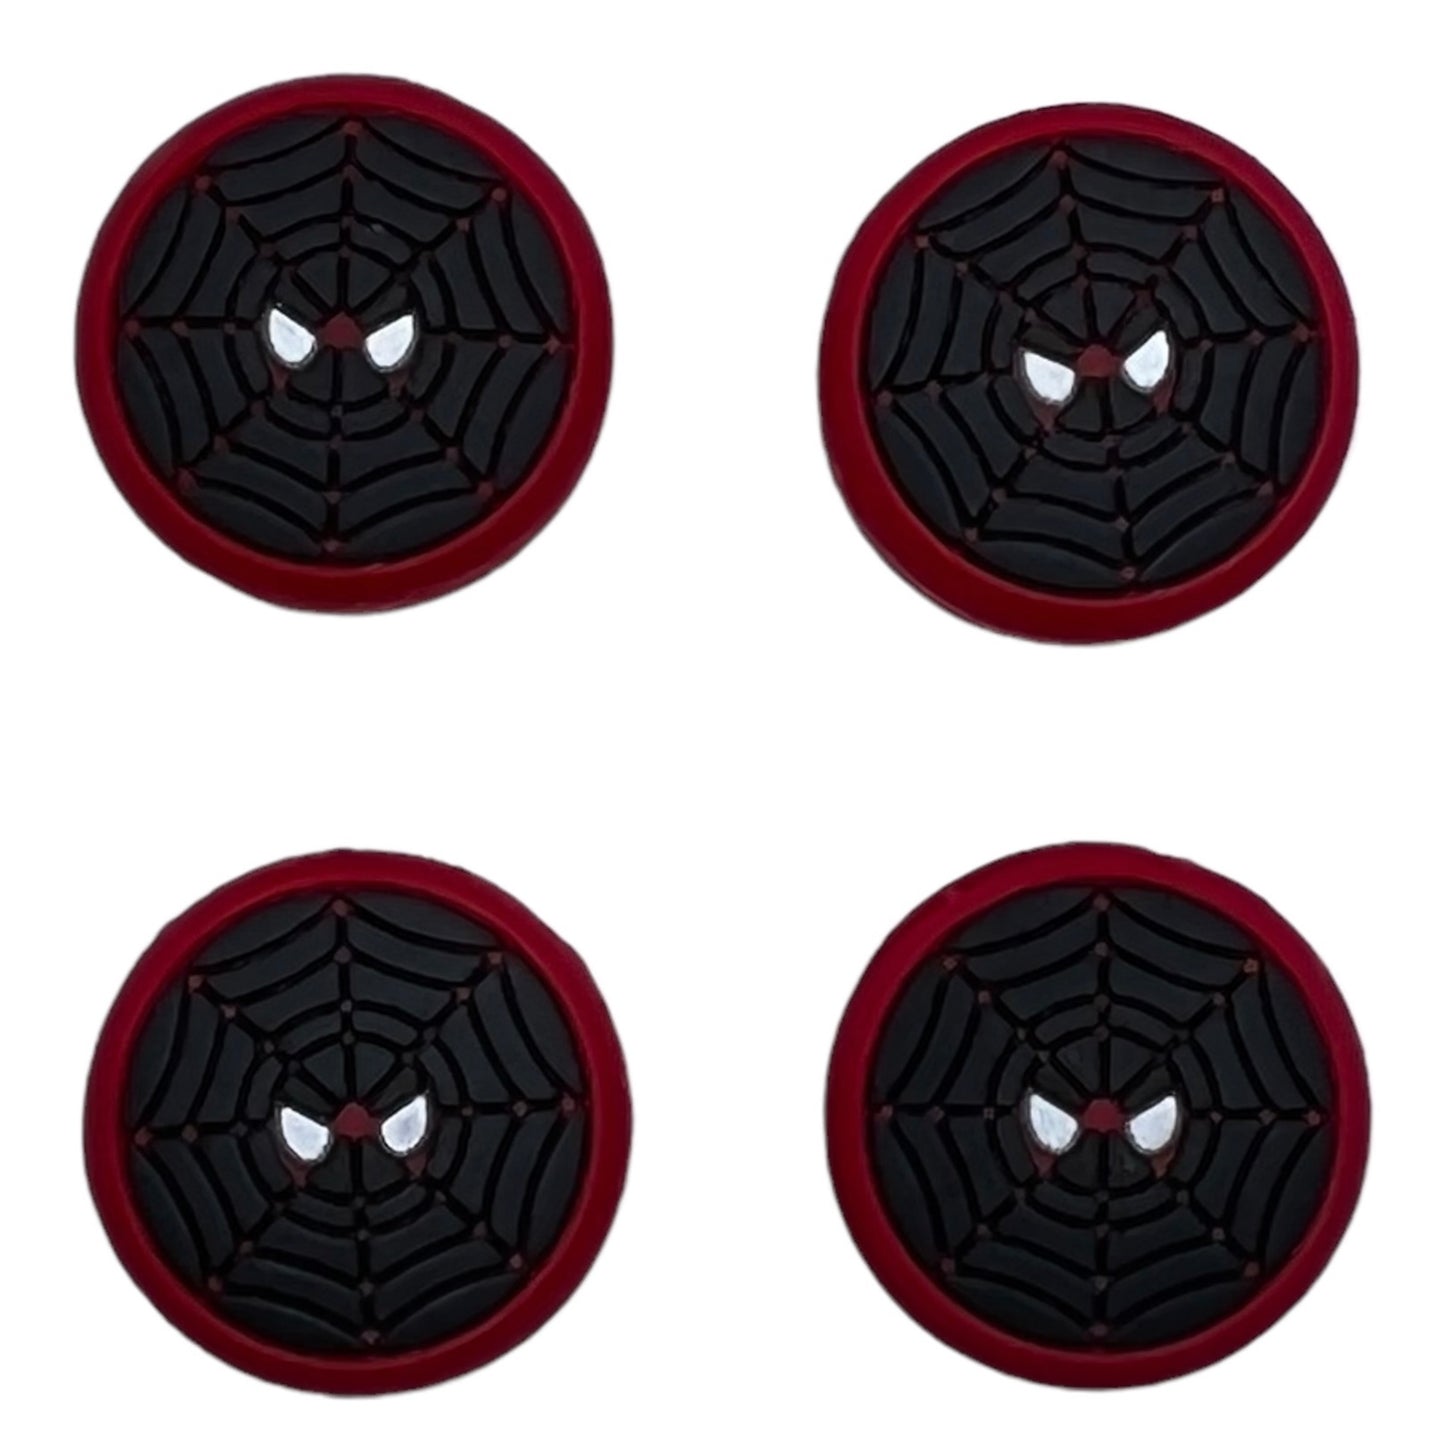 JenDore Black Red White Spider Eyes 4Pcs Silicone Thumb Grip Caps for Nintendo Switch Pro, PS5, PS4, and Xbox 360 Controller